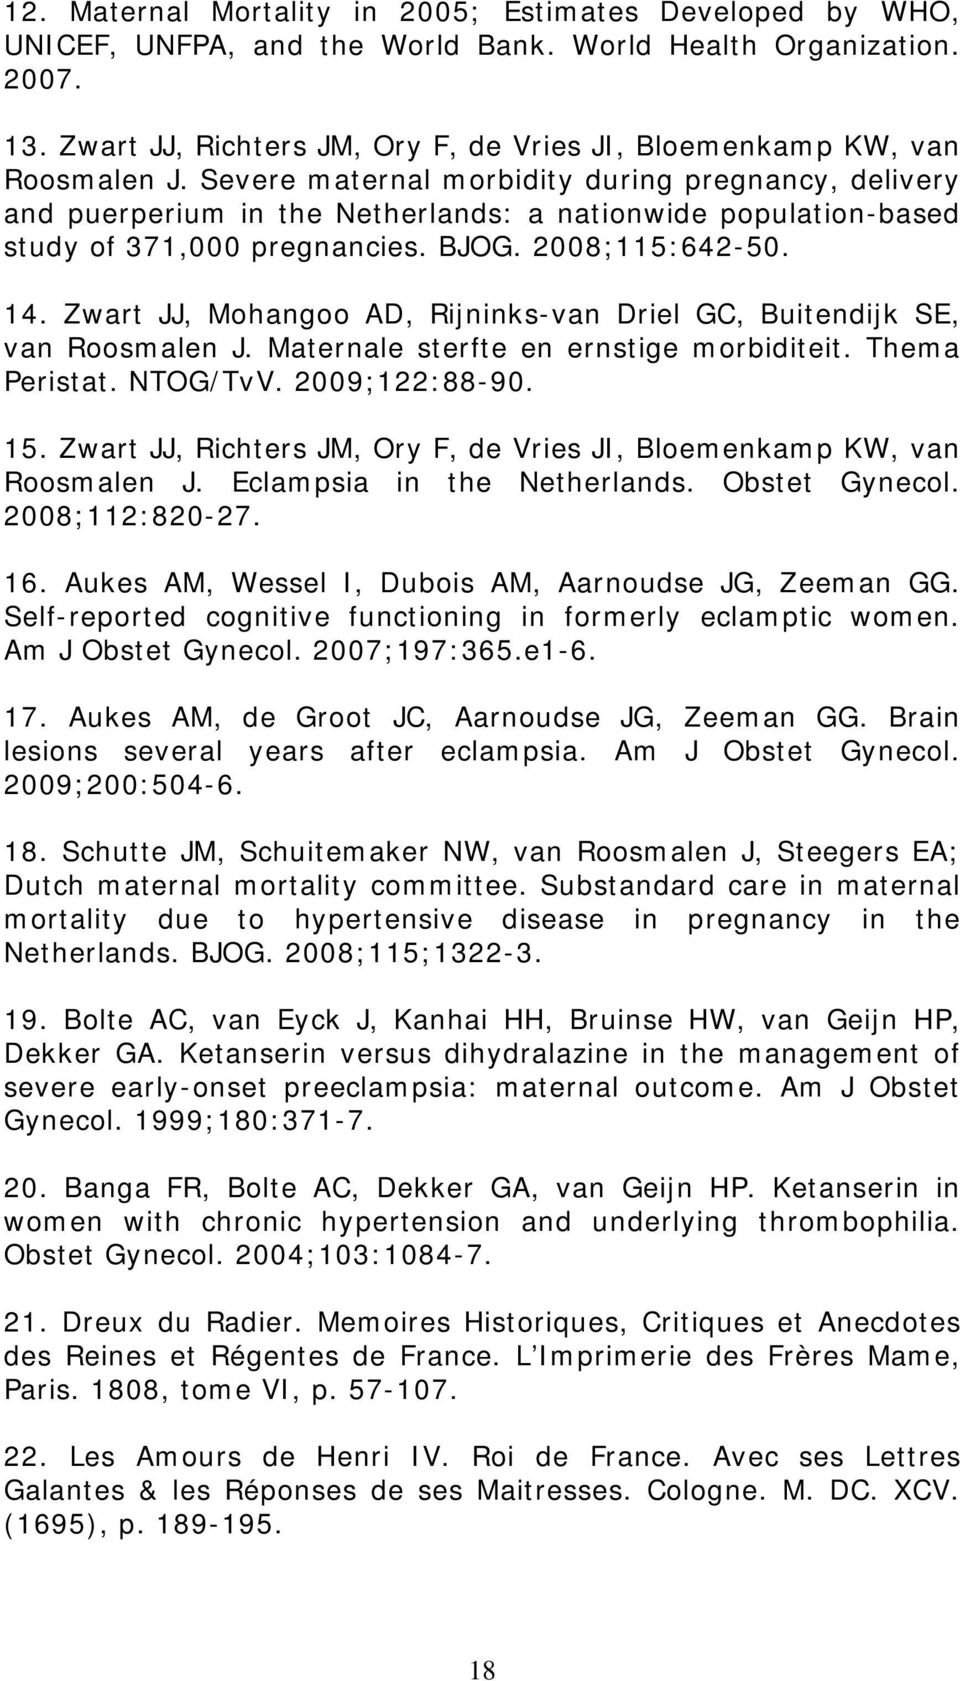 Severe maternal morbidity during pregnancy, delivery and puerperium in the Netherlands: a nationwide population-based study of 371,000 pregnancies. BJOG. 2008;115:642-50. 14.